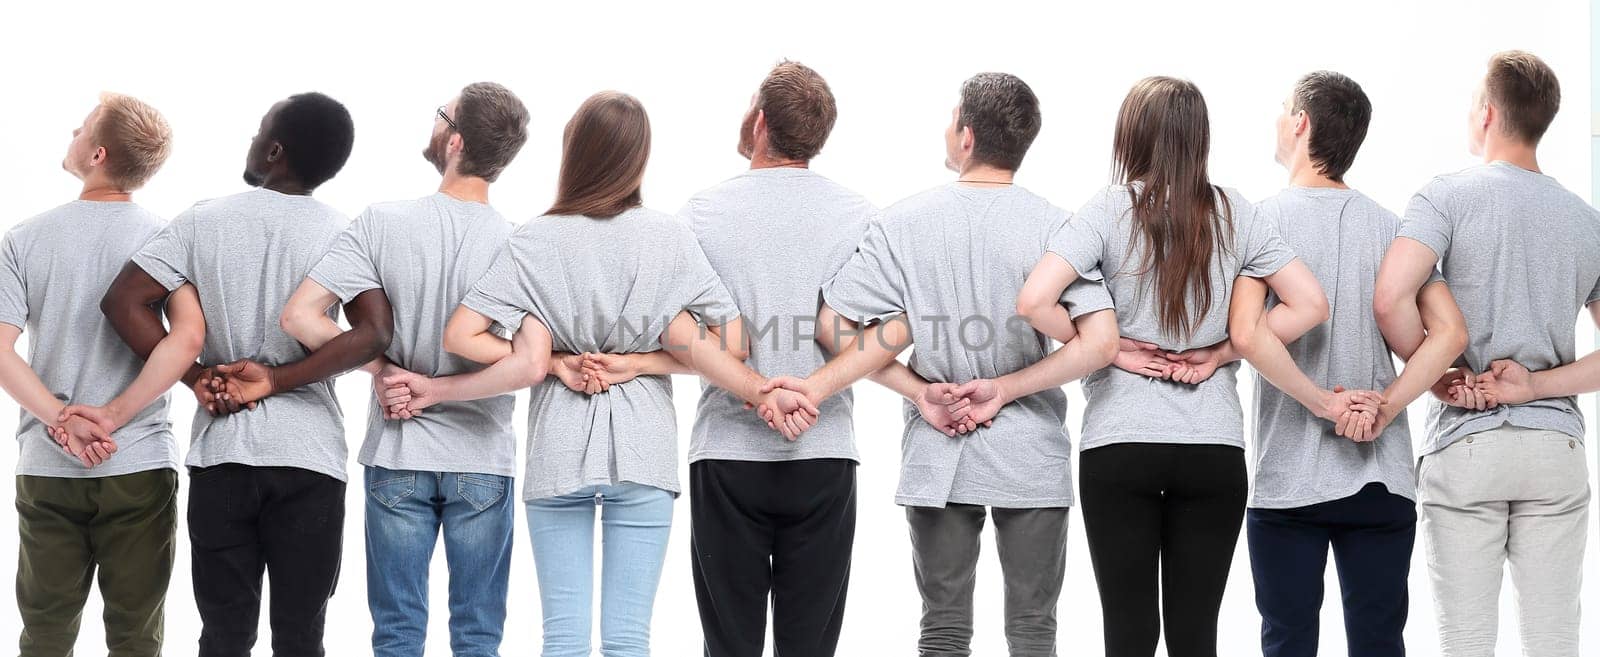 rear view. a large group of motivated young people. isolated on white background